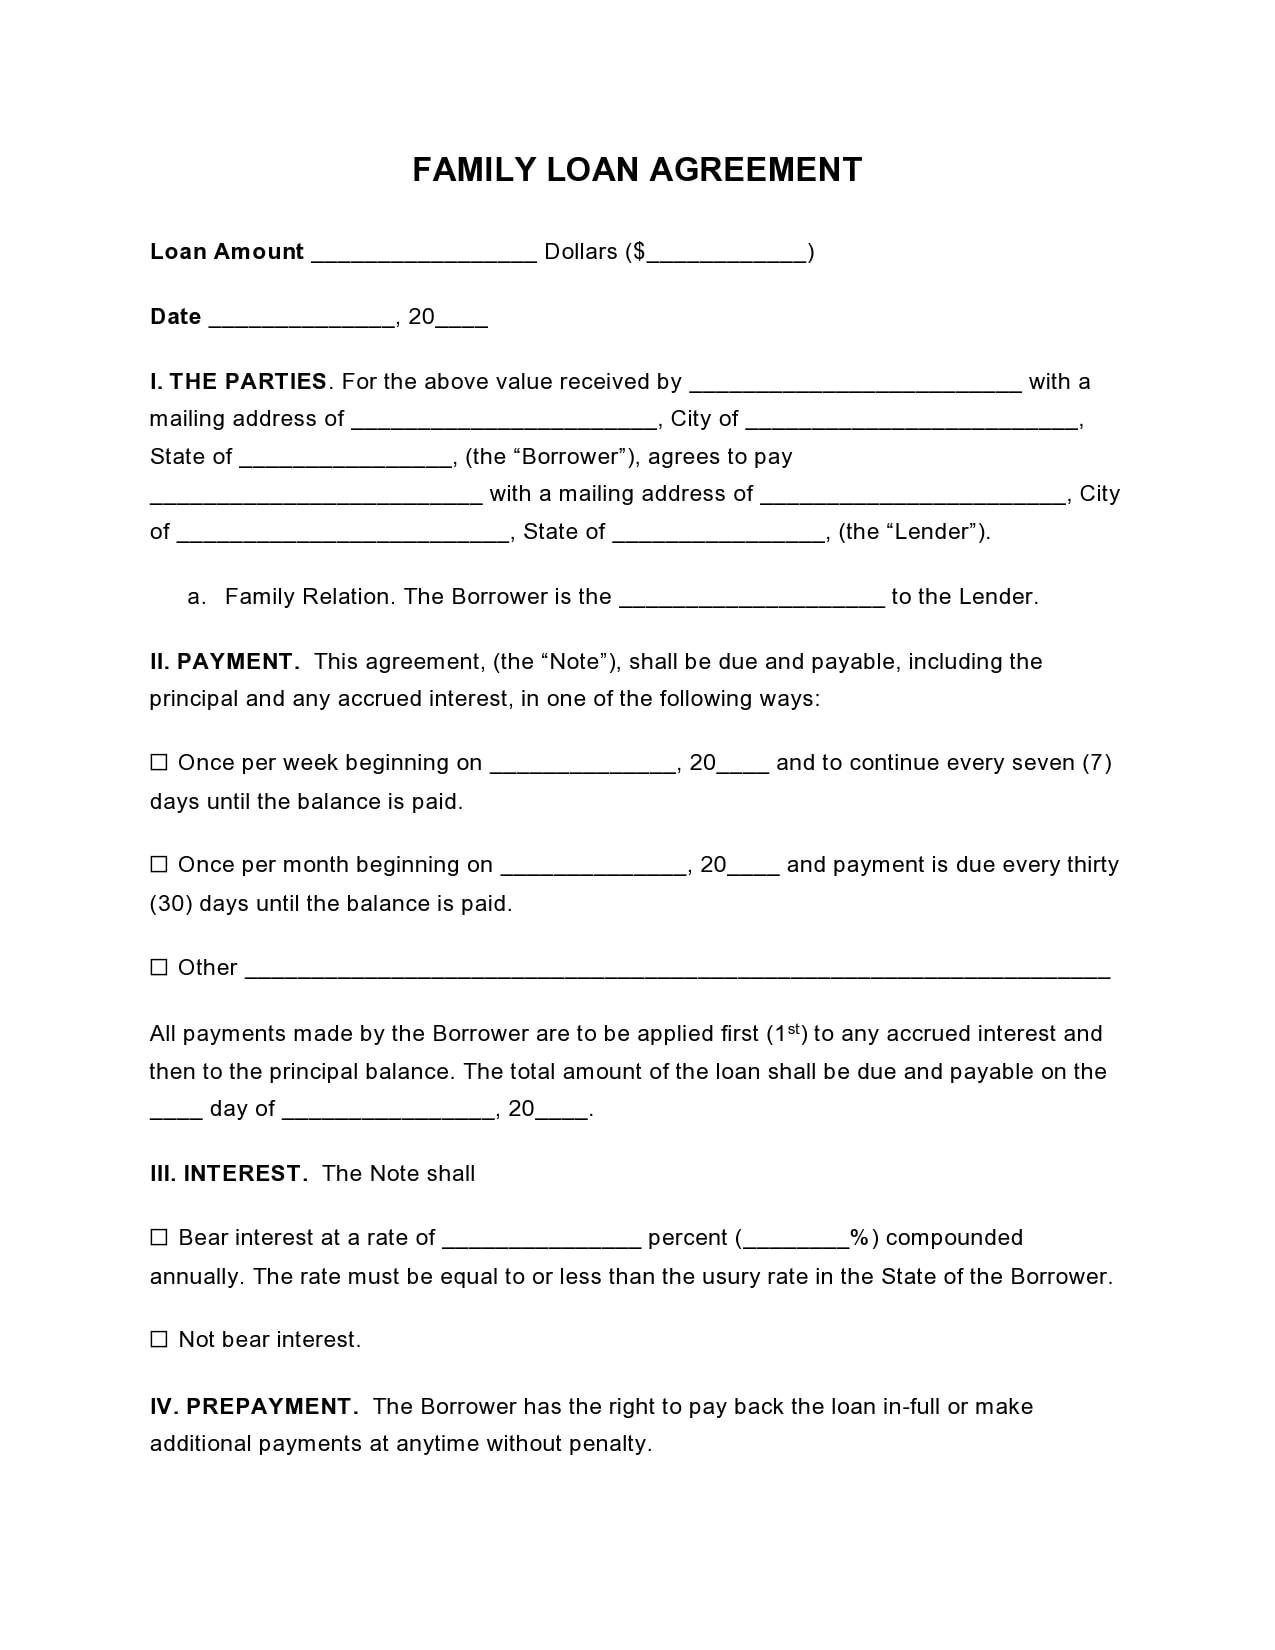 29 Simple Family Loan Agreement Templates 100 Free